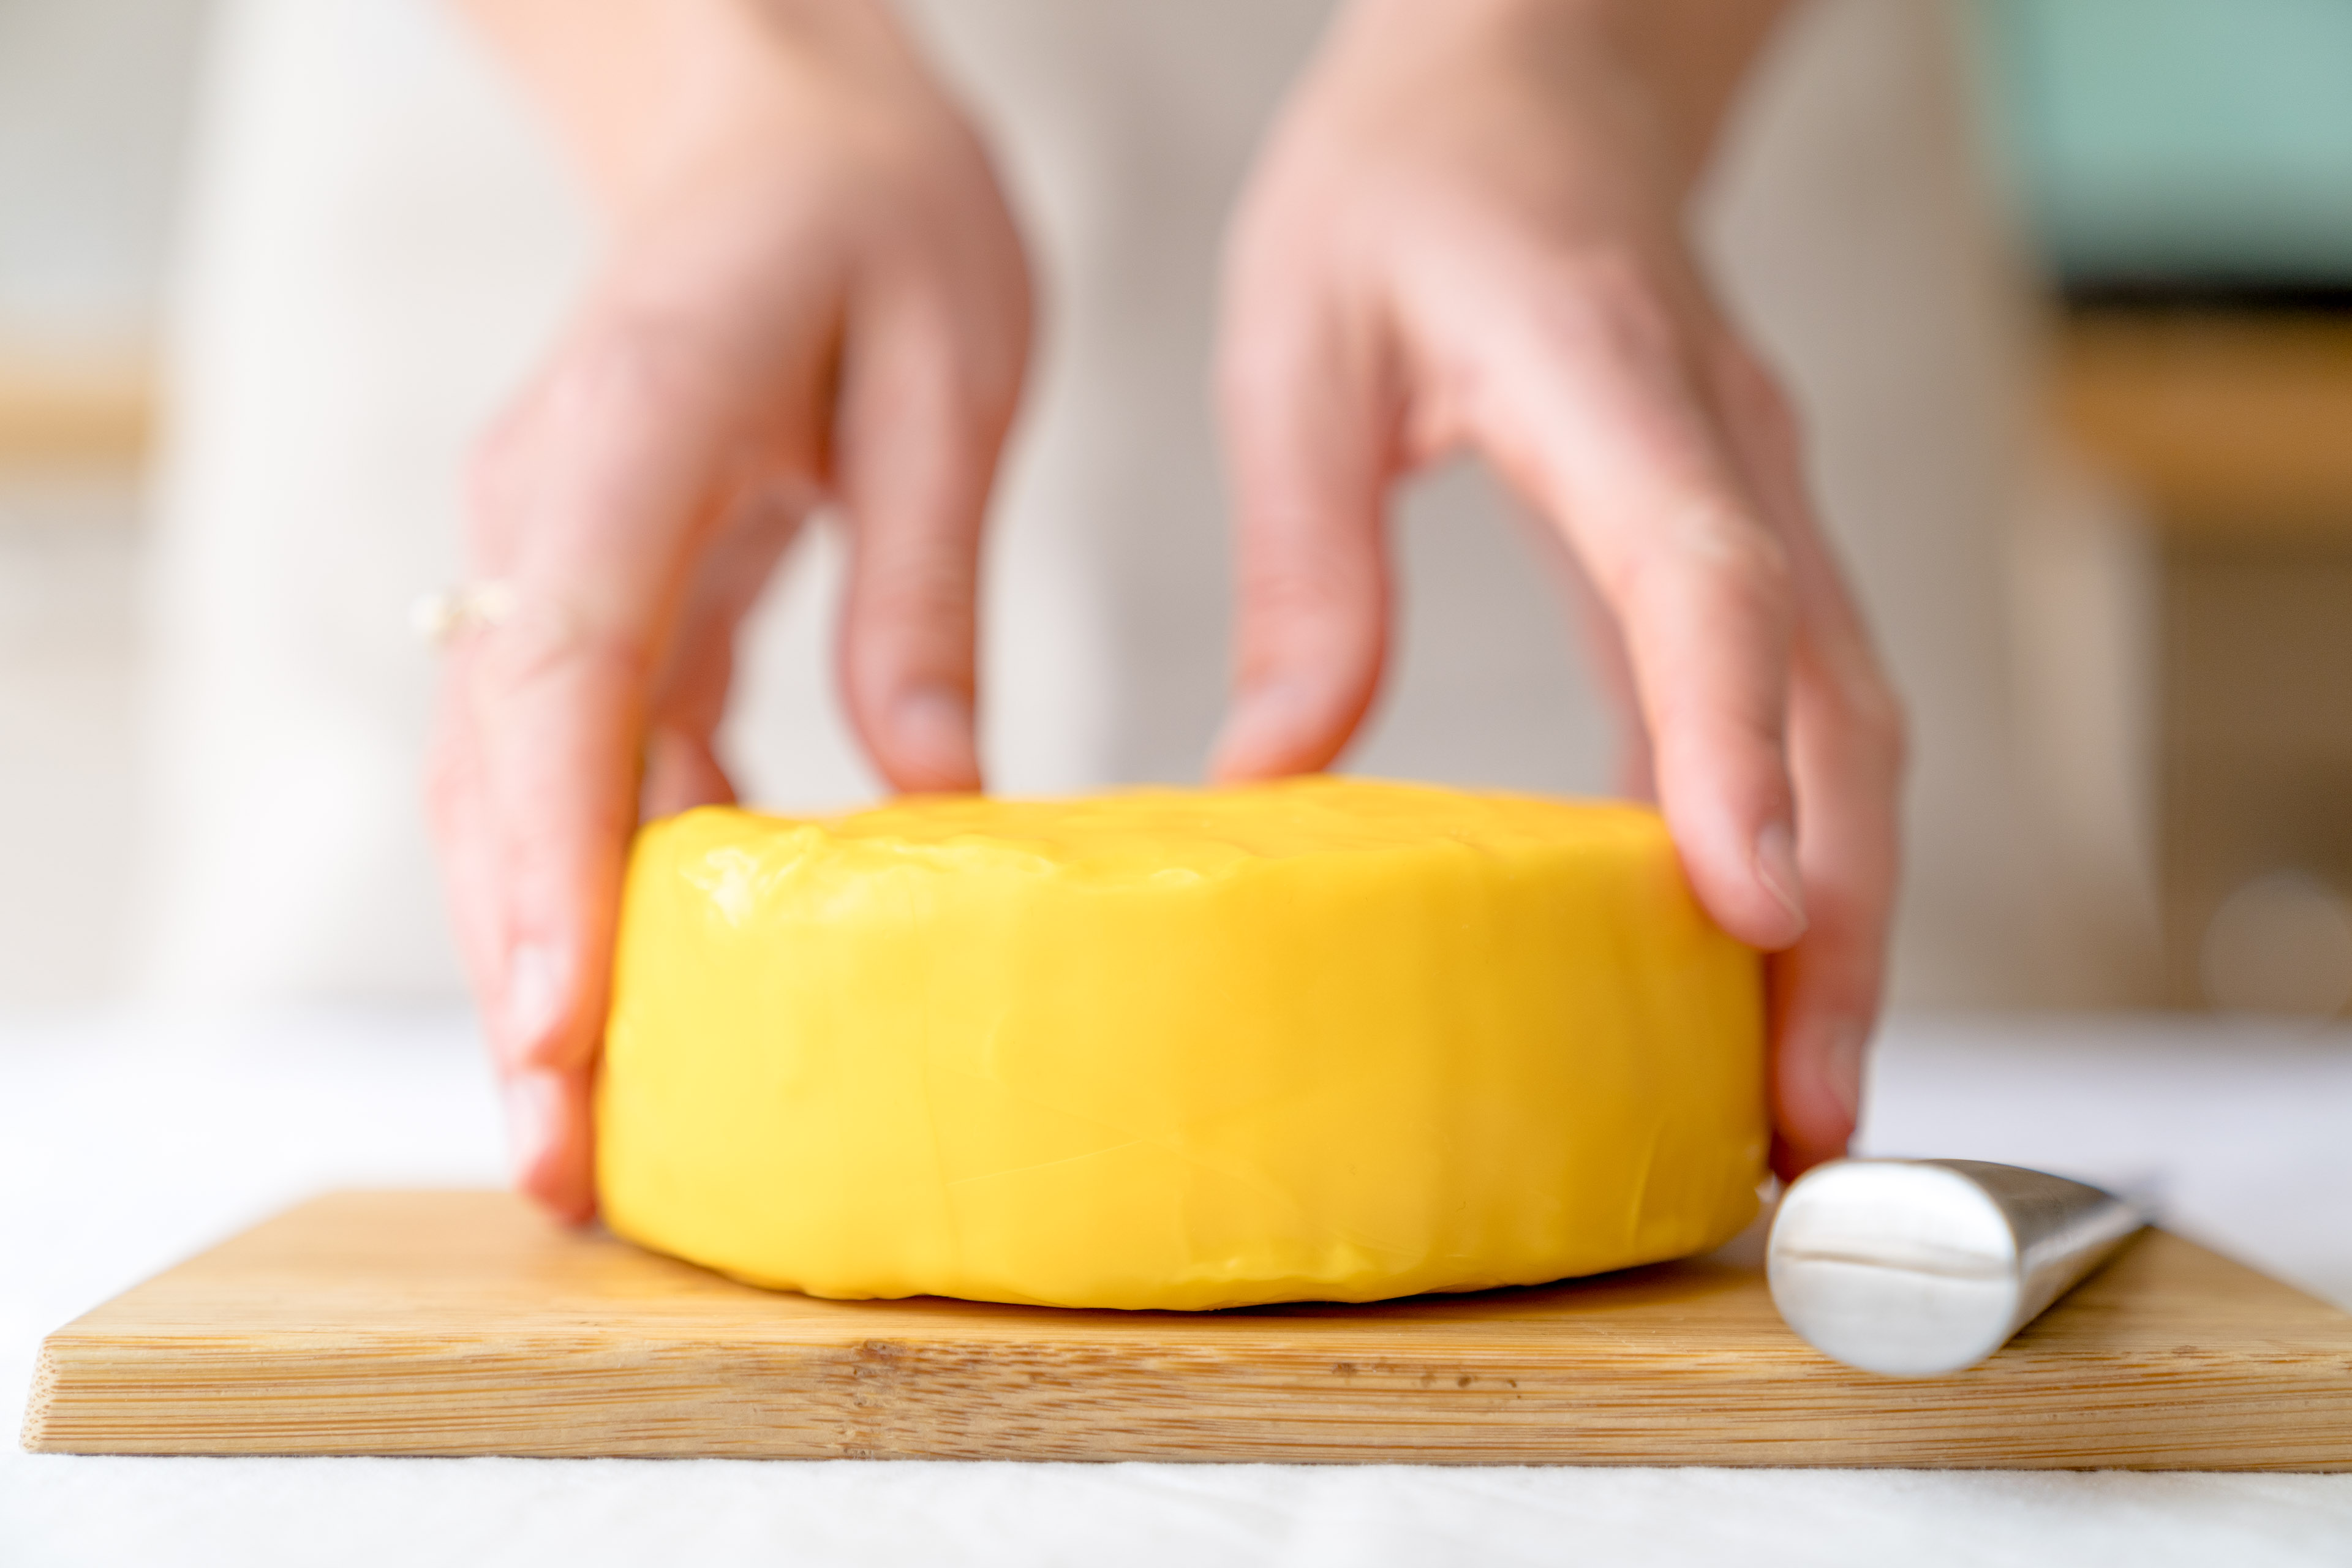 Hard Cheese tips and tricks